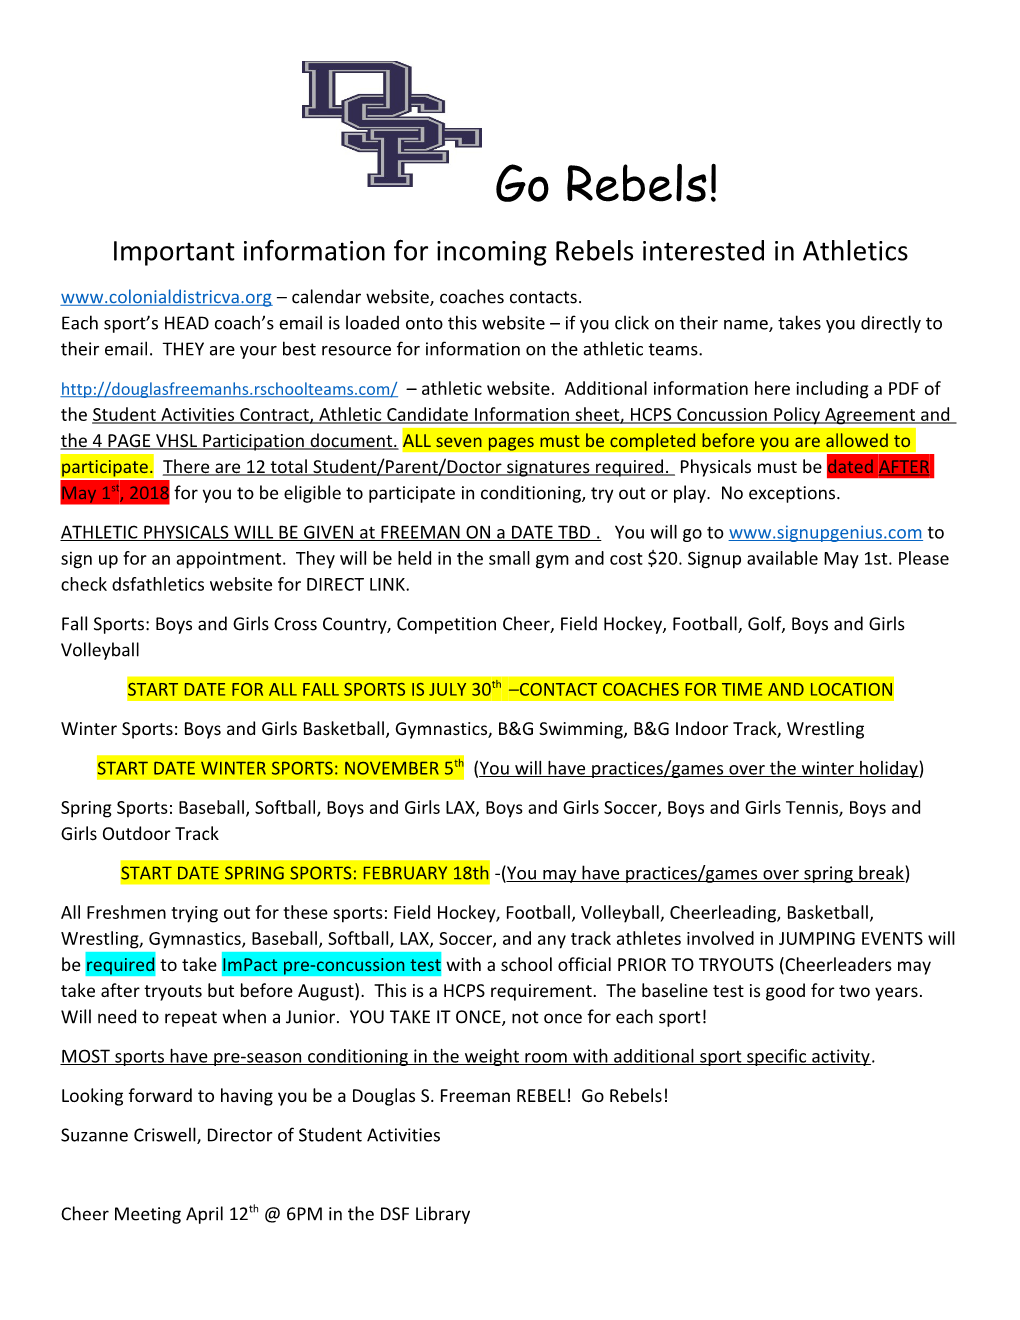 Important Information for Incoming Rebels Interested in Athletics